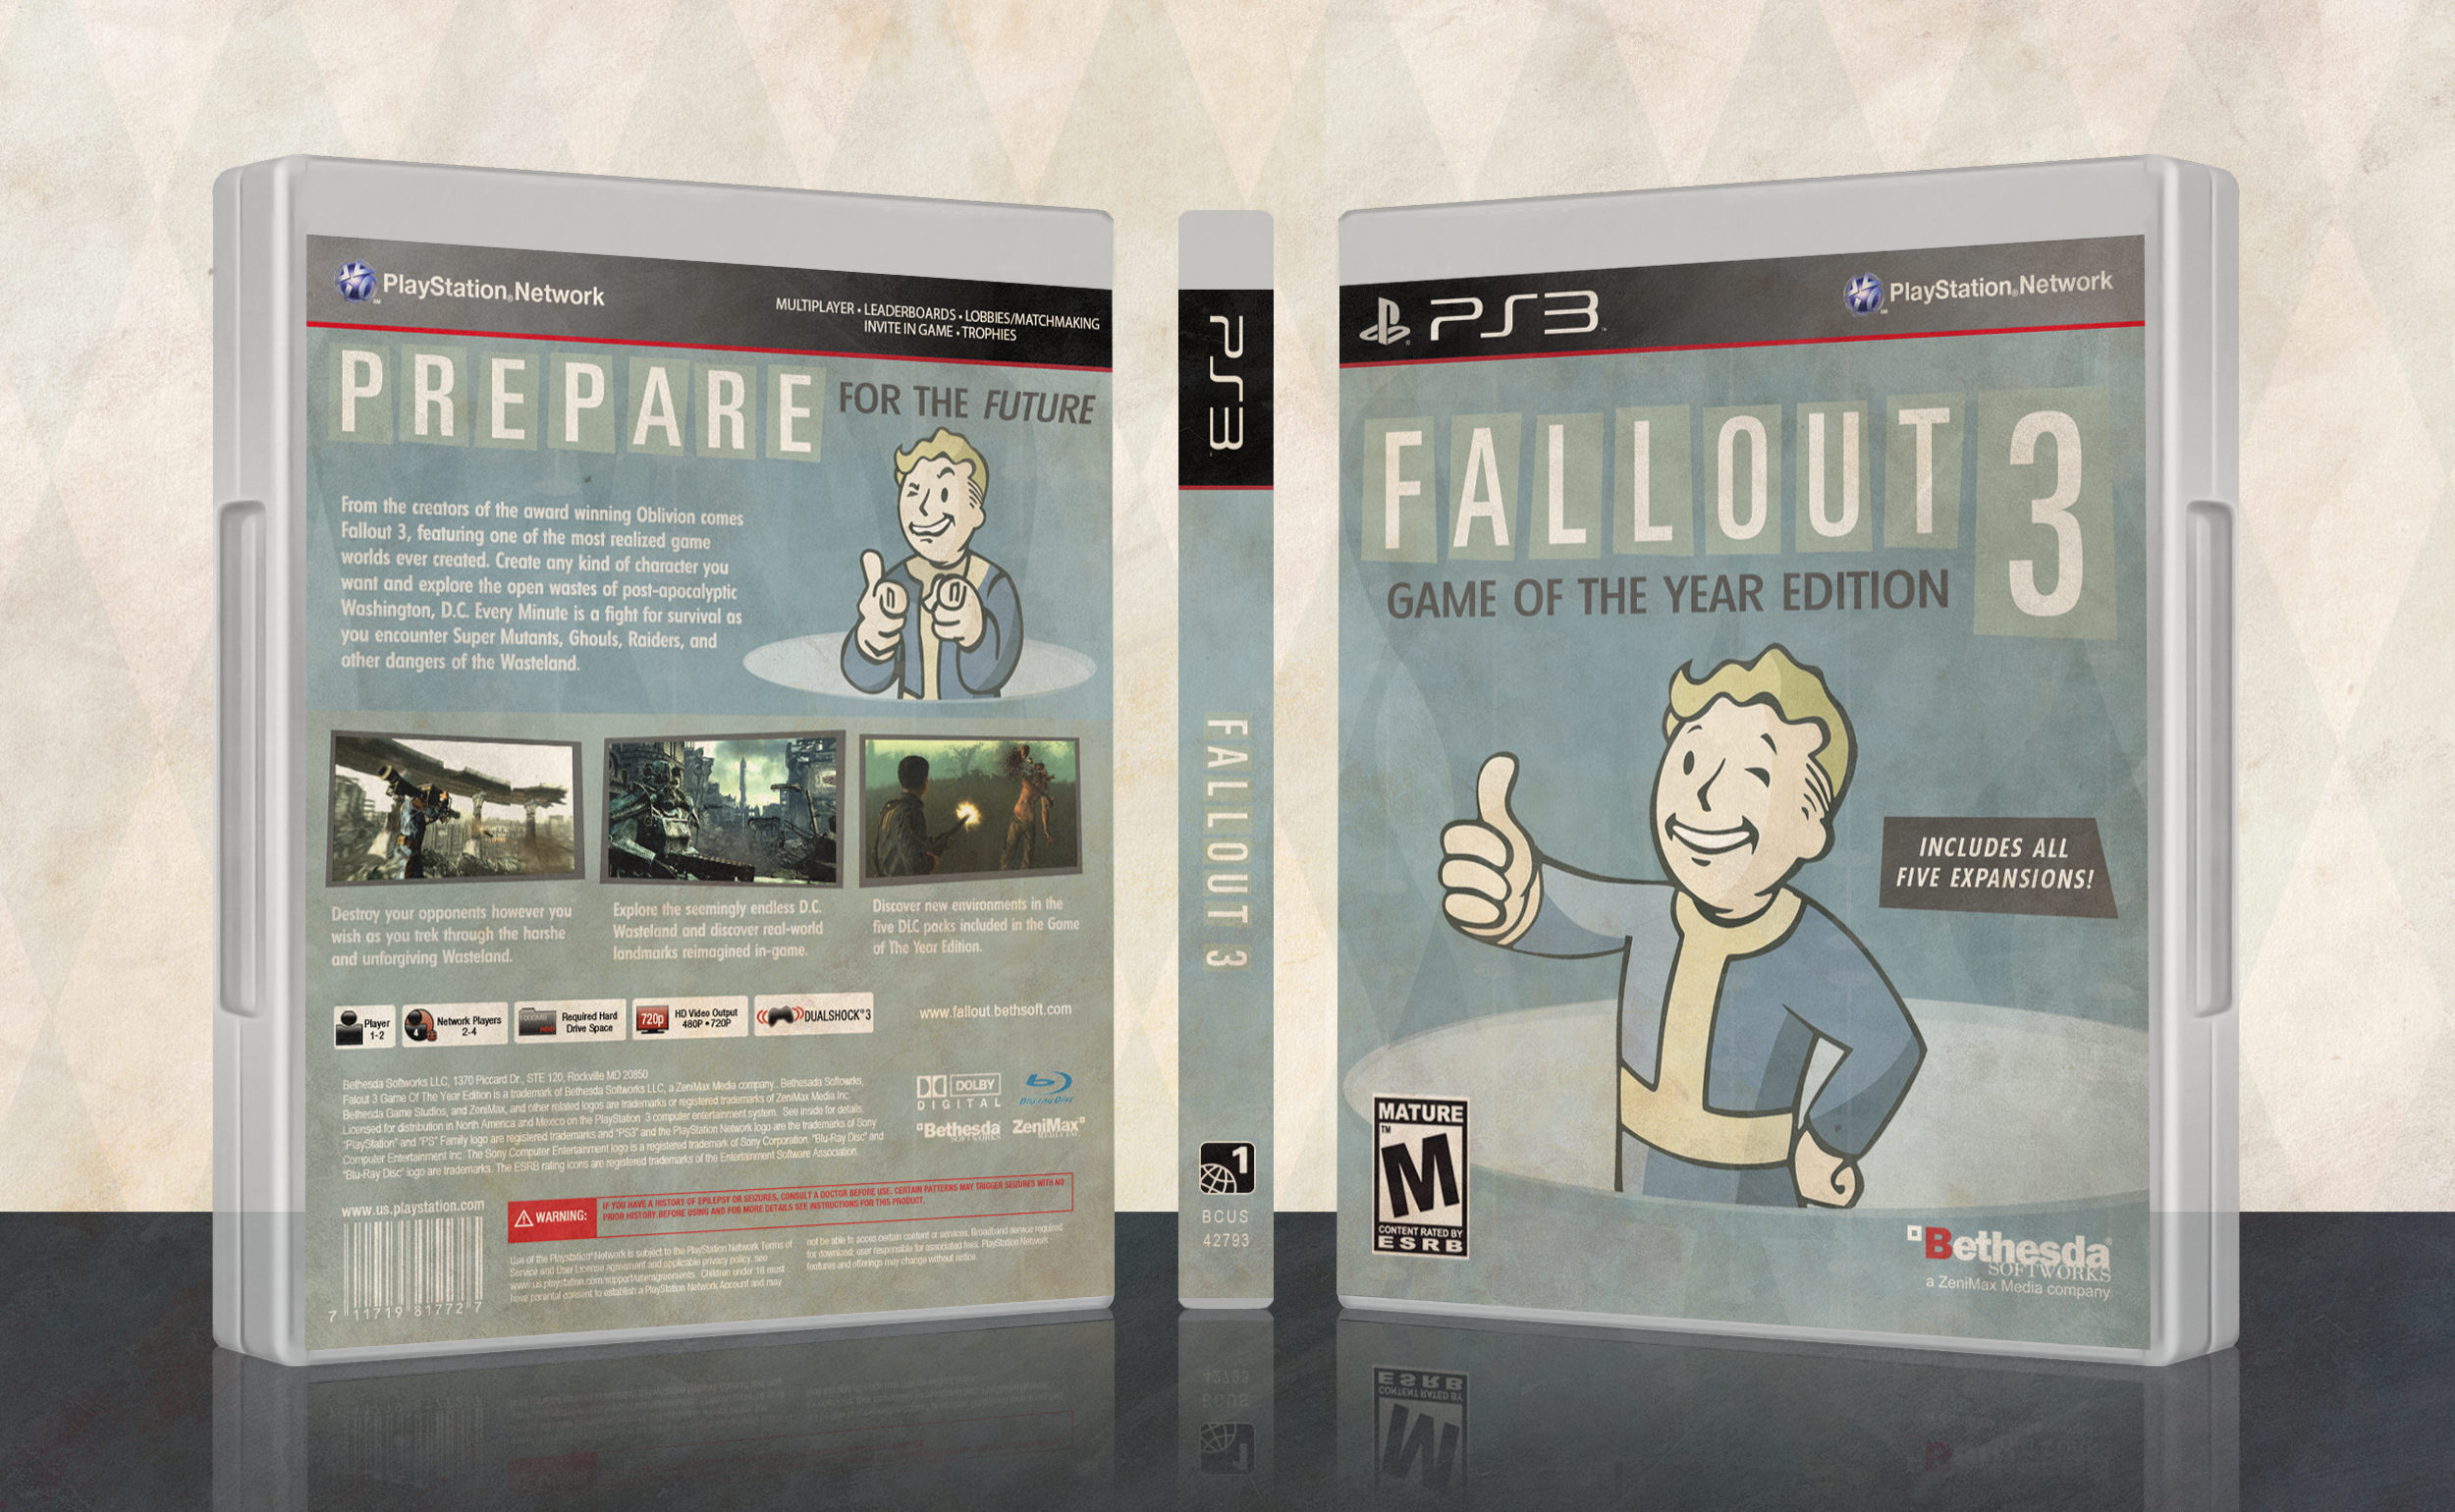 Fallout 3: Game of the Year Edition box cover